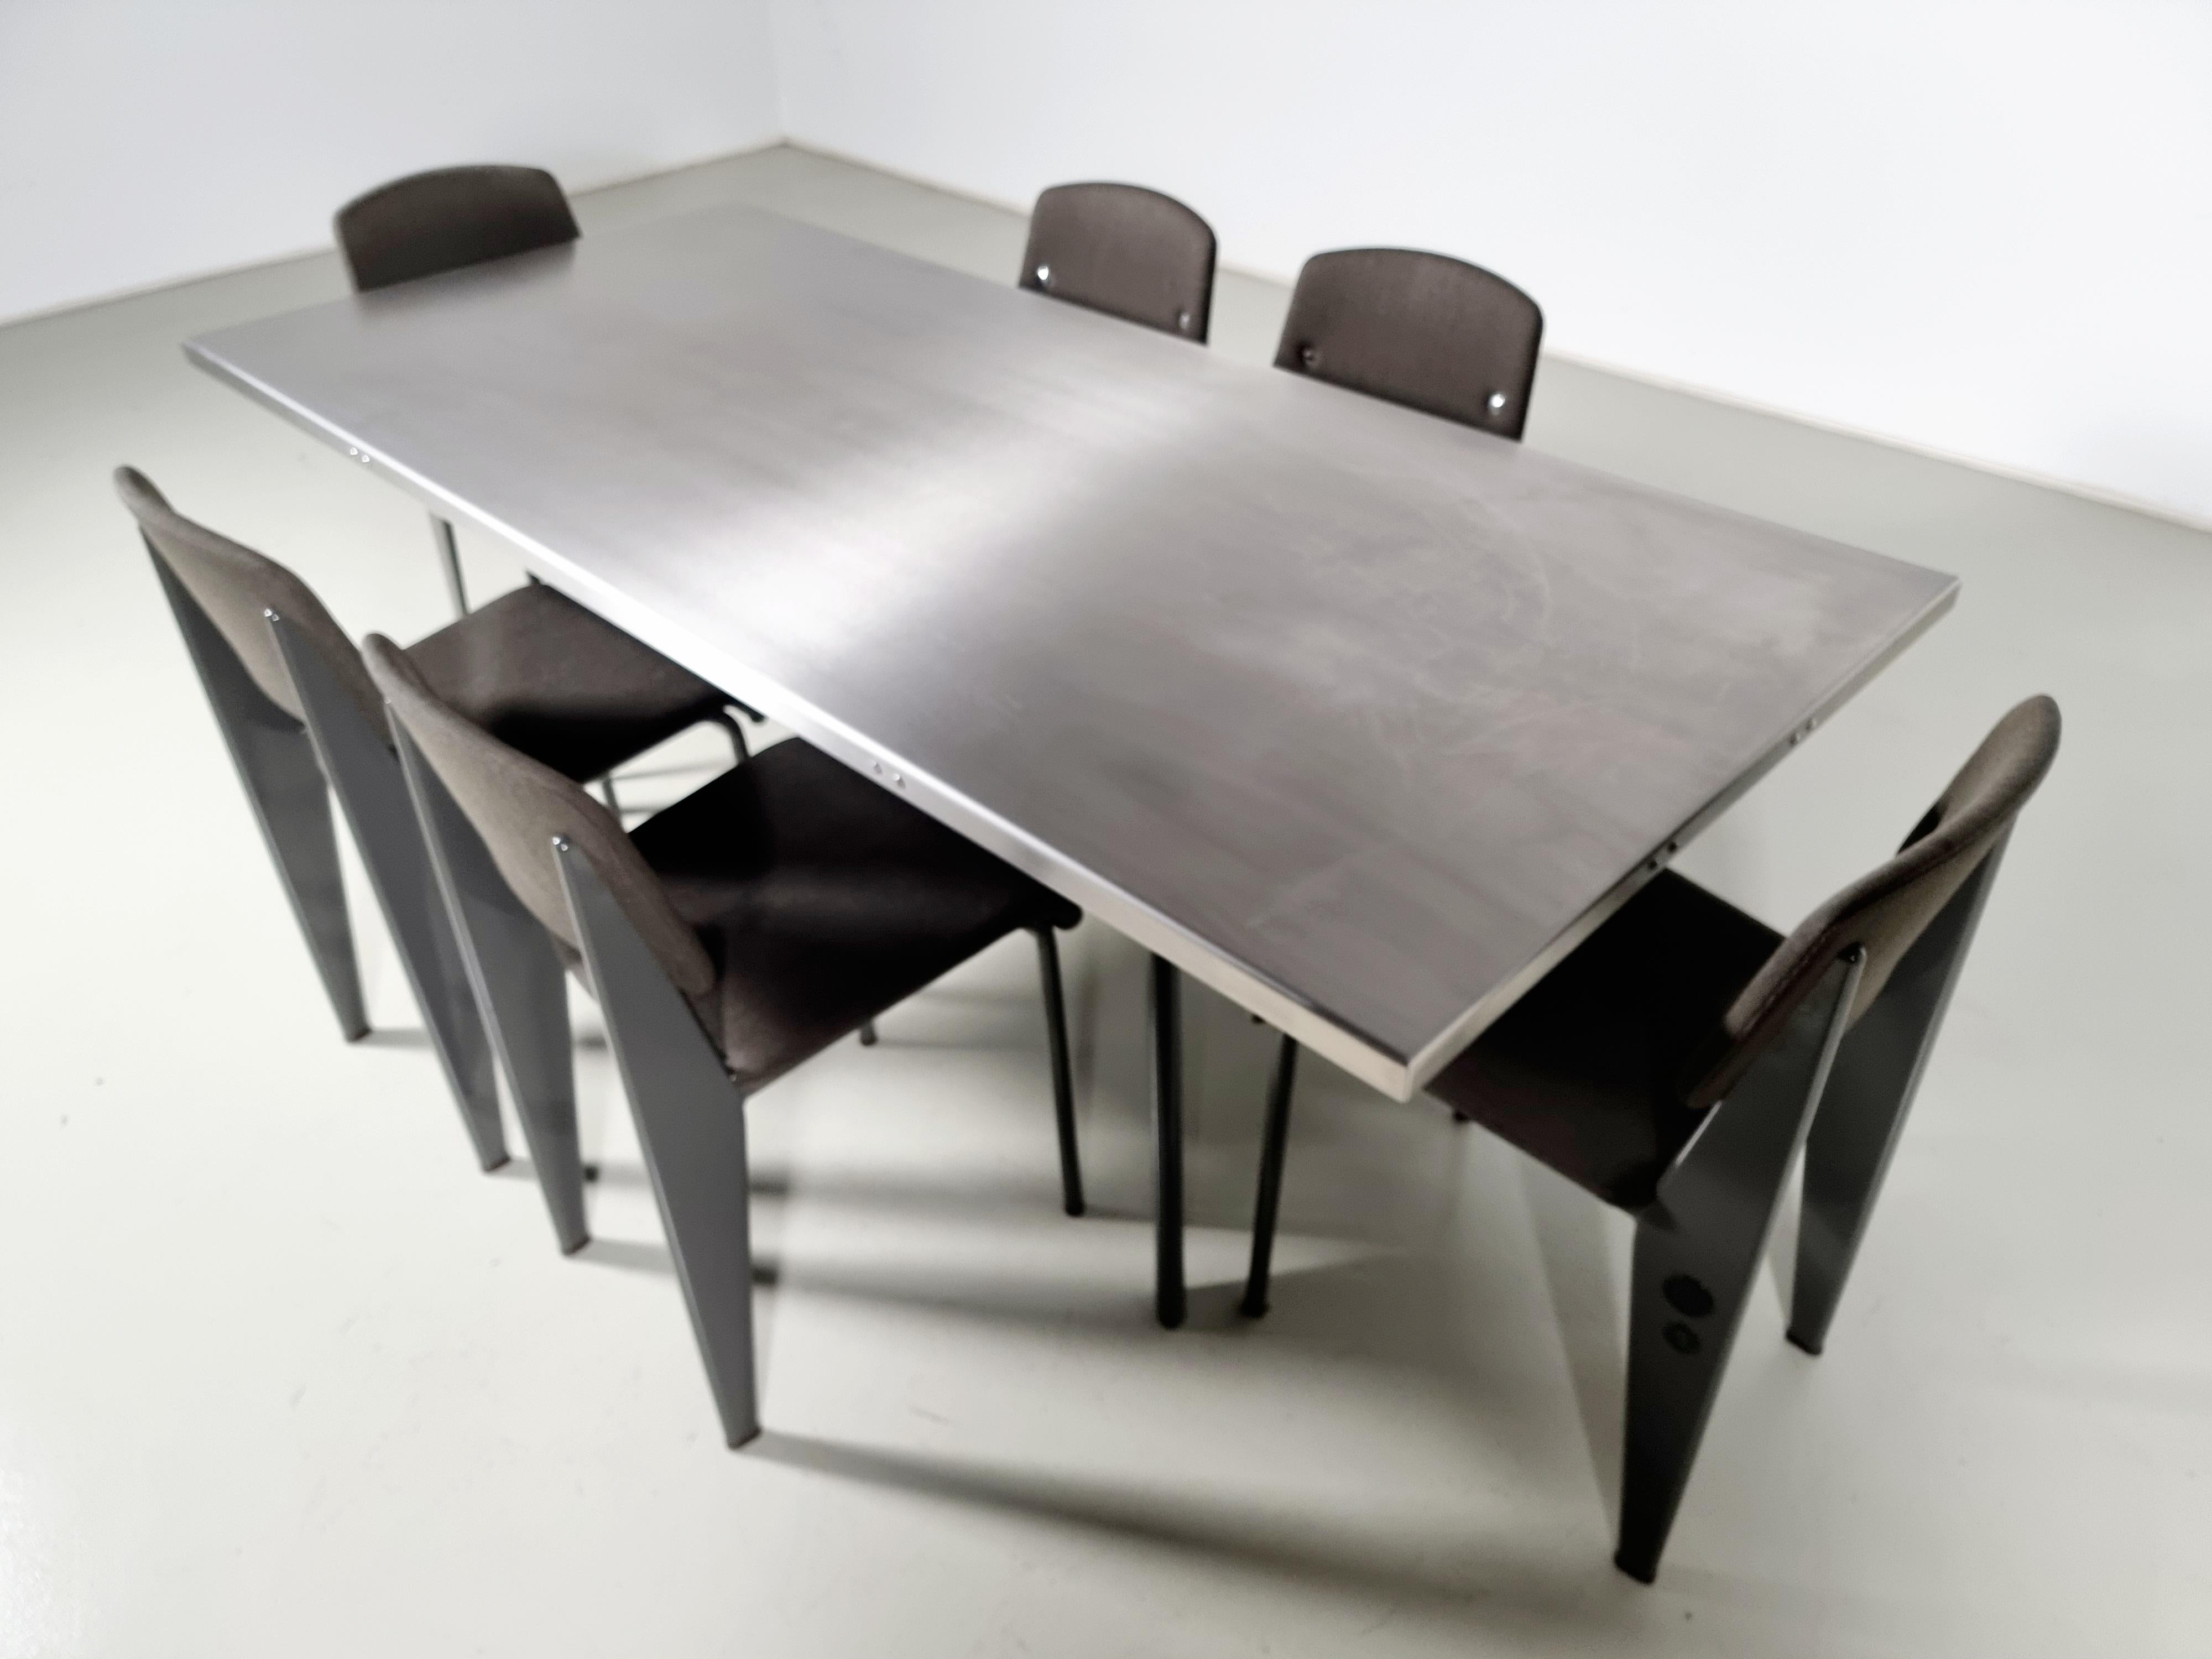 Jean Prouve by G-Star Raw for Vitra S.A.M. Tropique Table with matching chairs In Good Condition For Sale In amstelveen, NL